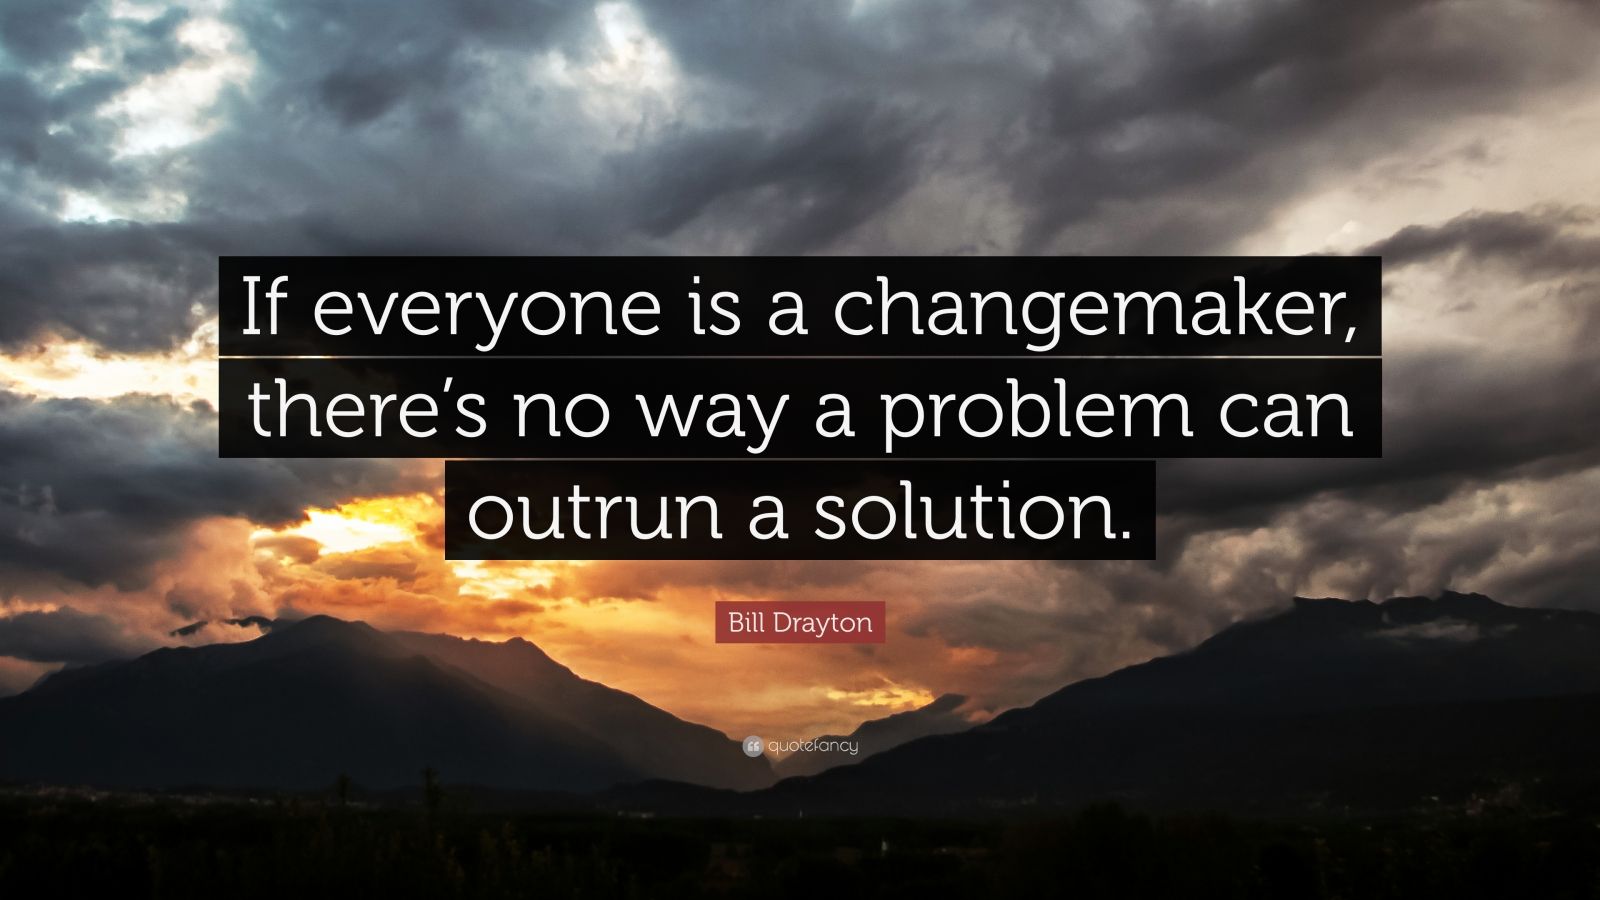 Bill Drayton Quote: “If everyone is a changemaker, there’s no way a ...